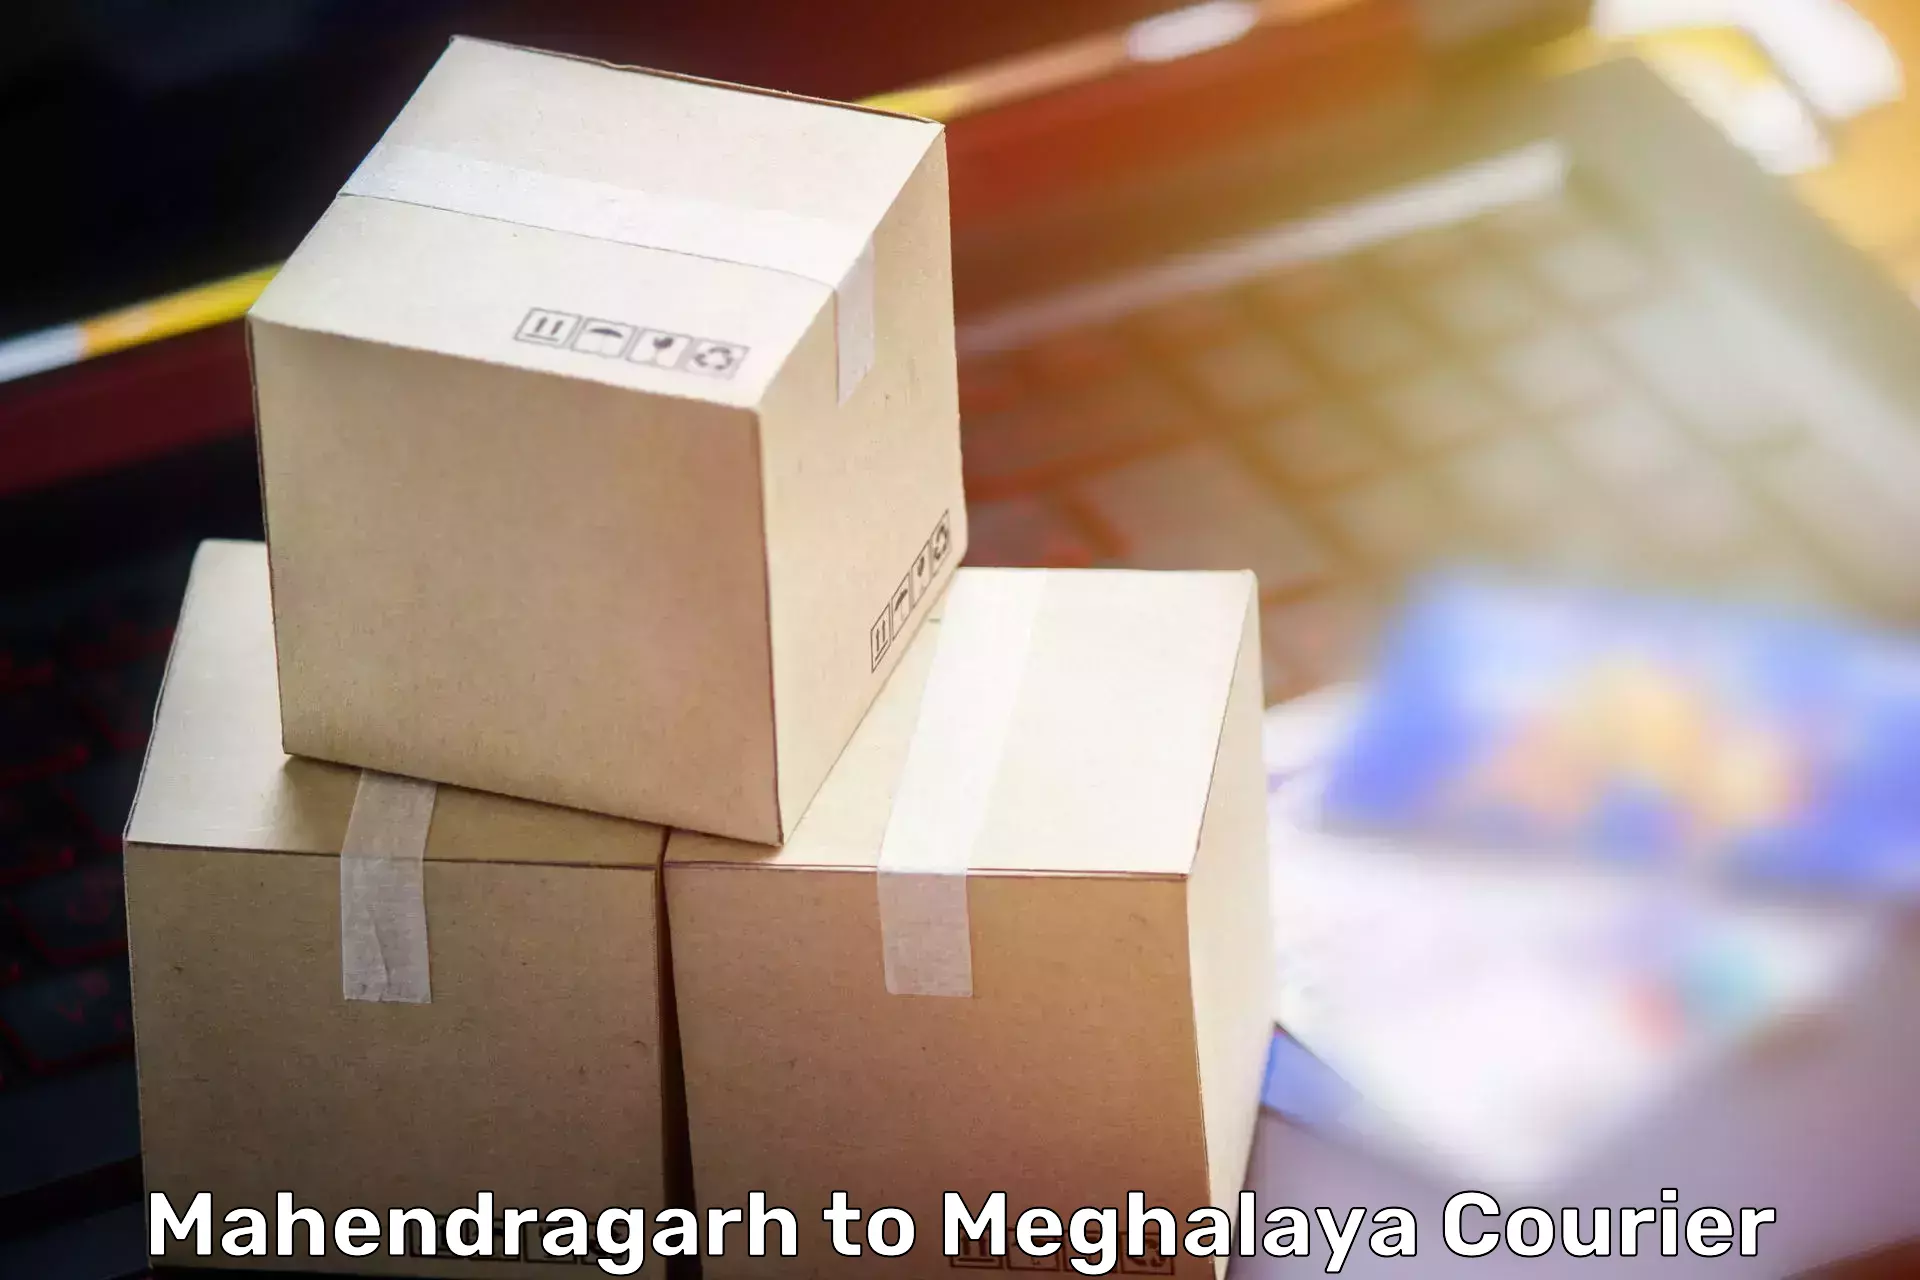 Moving and packing experts Mahendragarh to Nongpoh